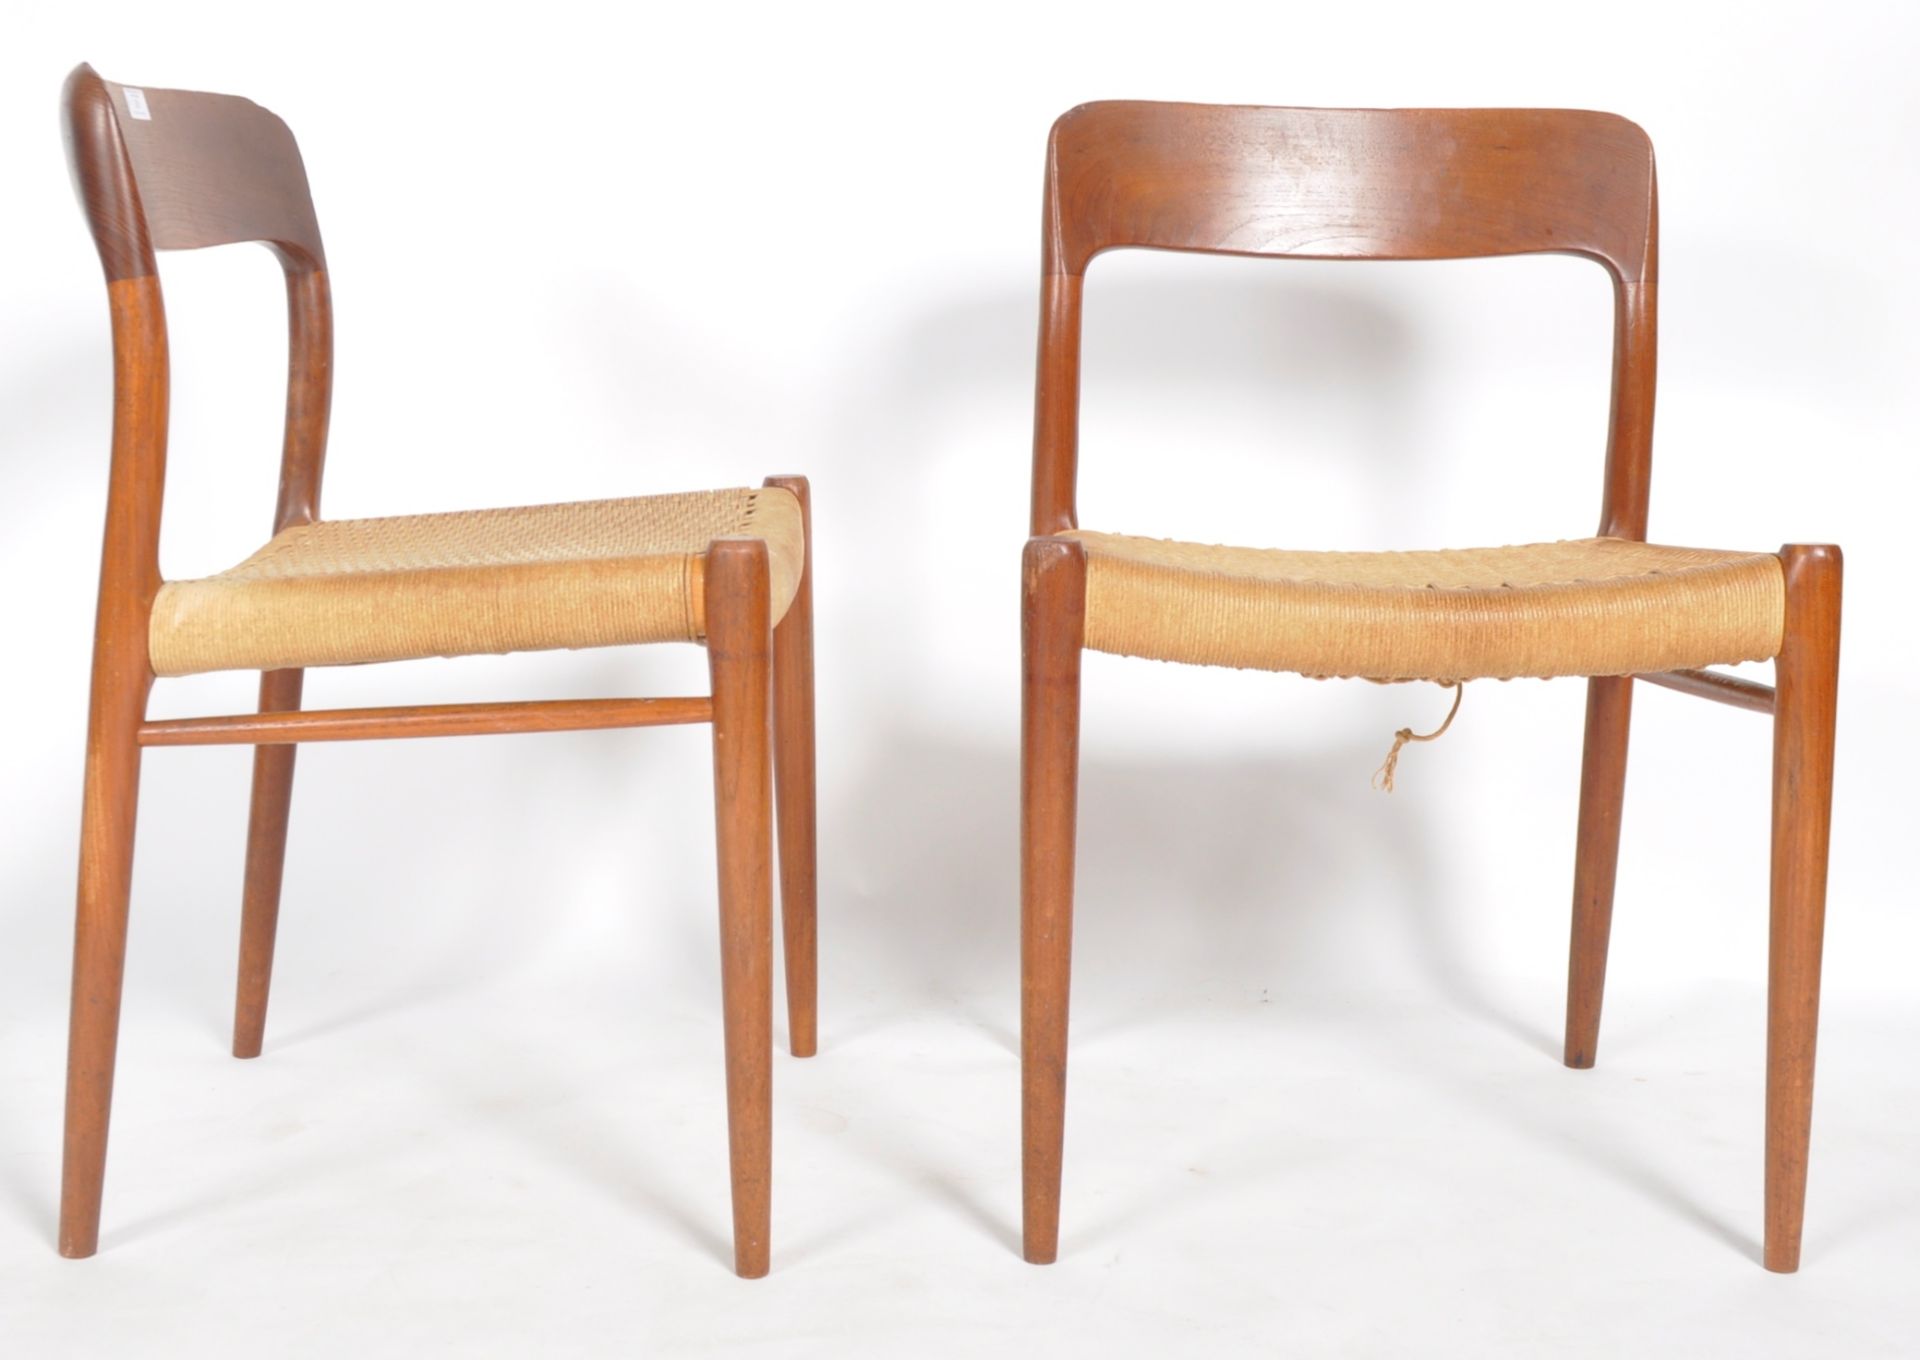 NIELS MOLLER FOR JL MOLLER - MODEL 75 - FOUR DINING CHAIRS - Image 8 of 9